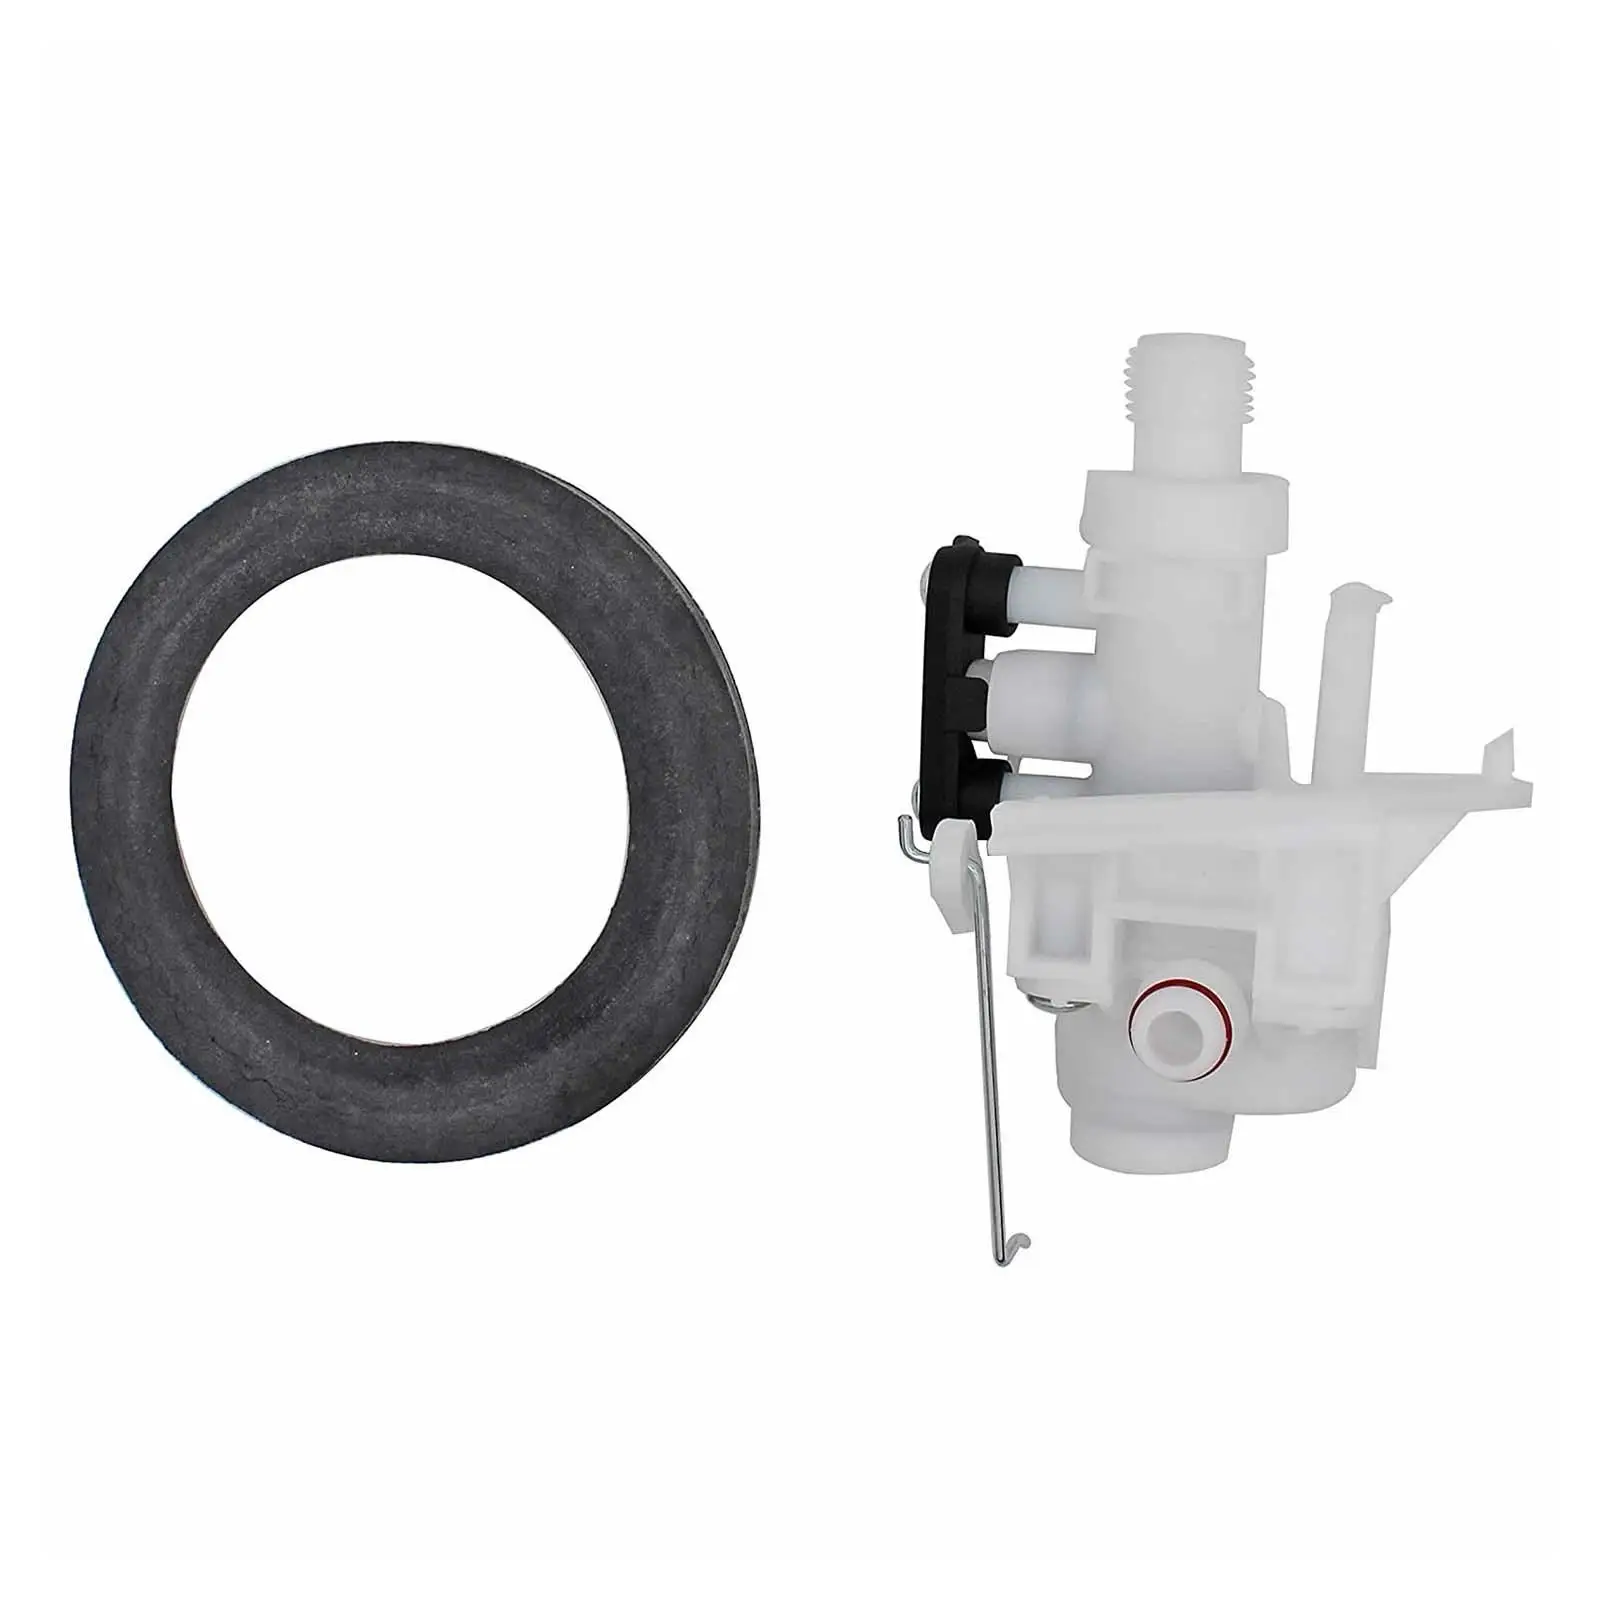 31705 Water Valve with Seal RV Toilet Valve with Seal for RV Replace Parts